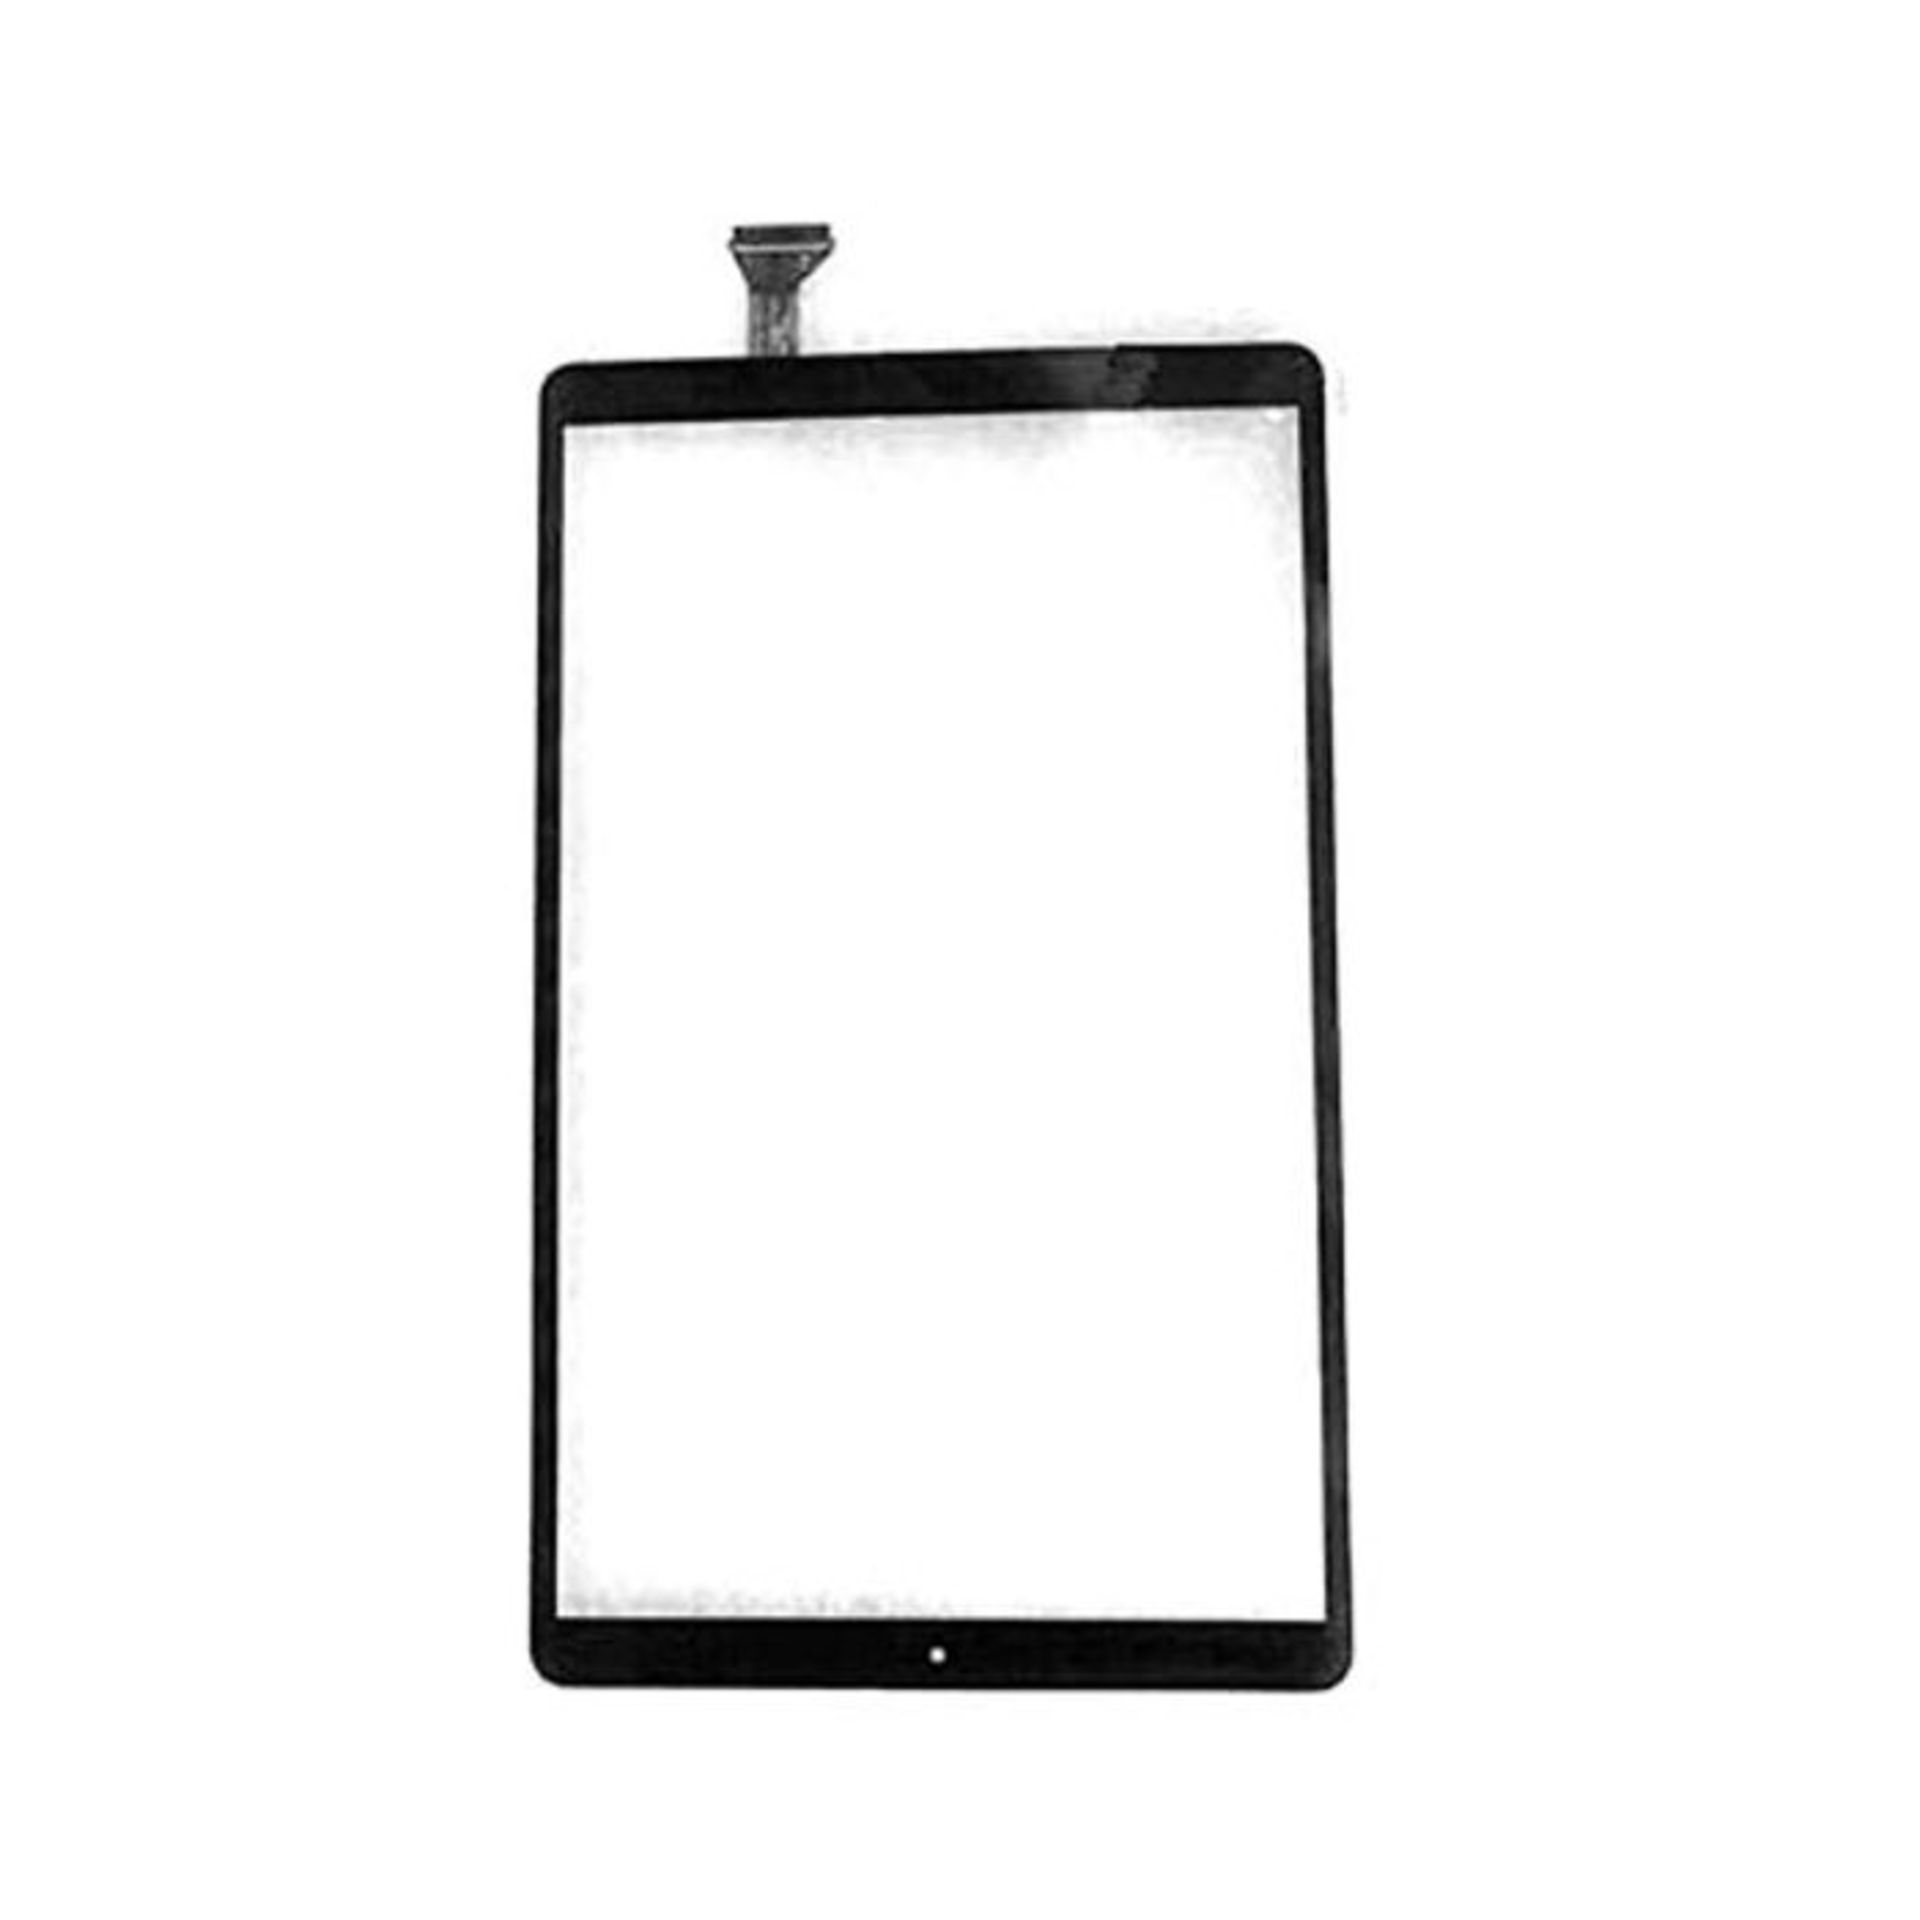 LeHang Touch Screen Digitizer Replacement For Samsung Galaxy Tab A 10.1 2019 SM-T510 S